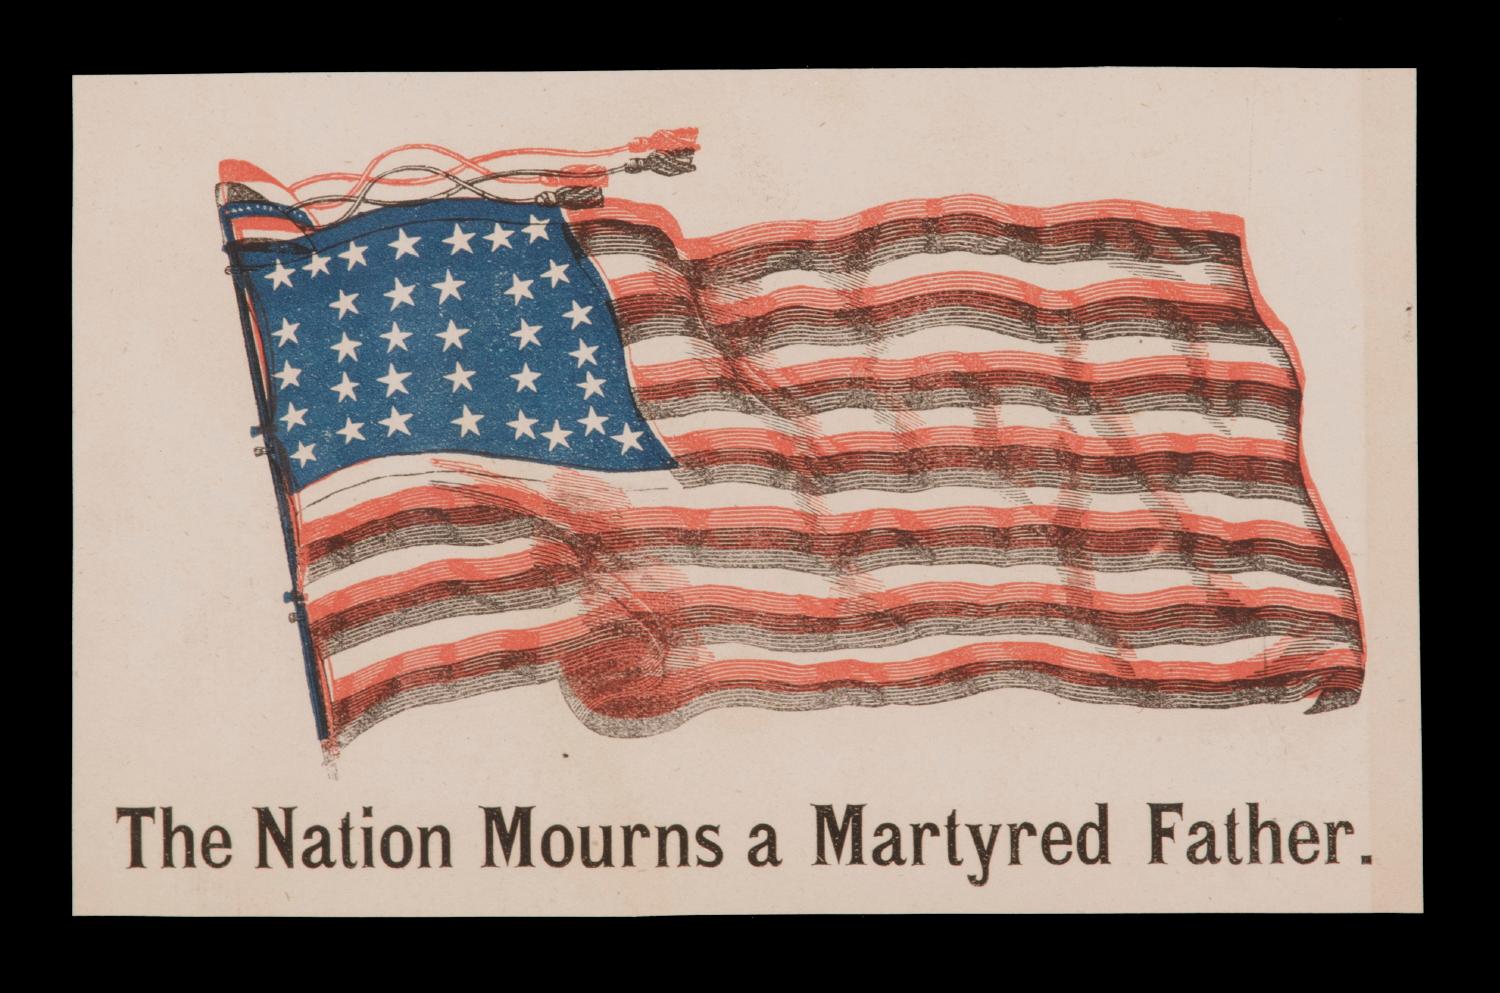 1865 ABRAHAM LINCOLN MOURNING BROADSIDE / HANDBILL DEPICTING A RED AND BLACK STRIPED FLAG WITH 34 STARS 

Small paper broadside with an illustration of a 34 star, Civil War era flag, with text beneath that reads: “A Nation Mourns a Martyred Father.”